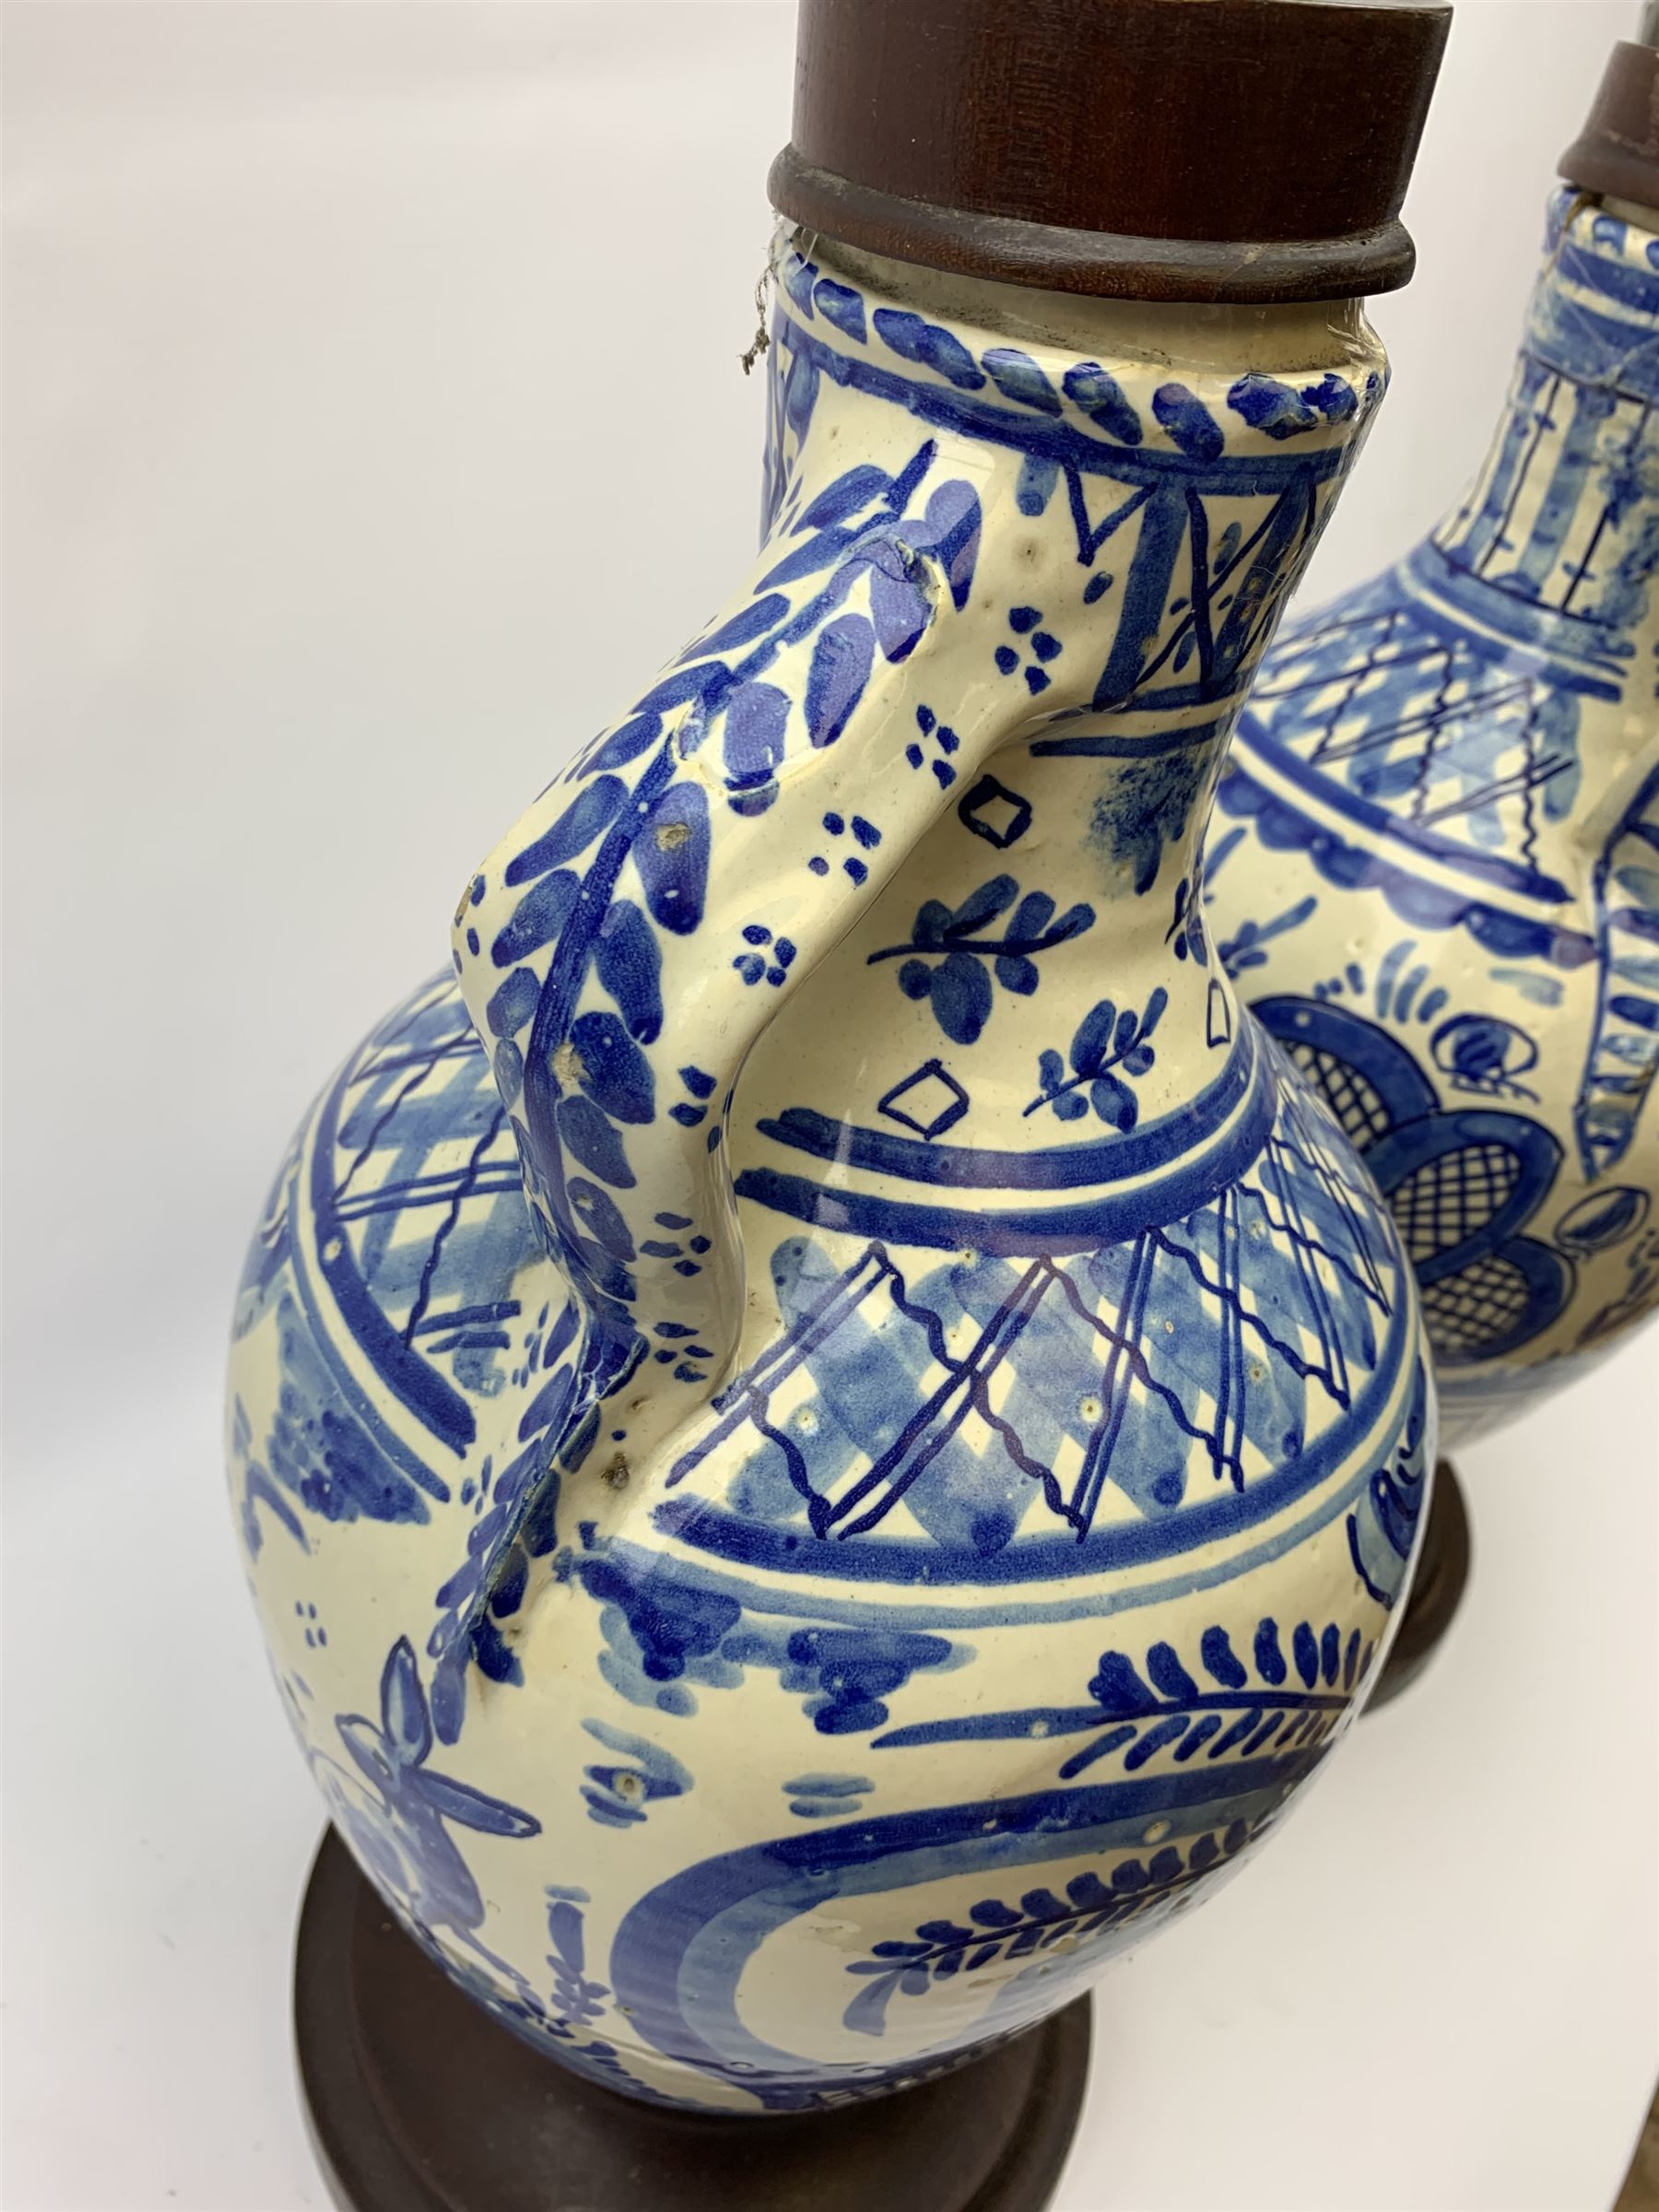 A pair of 20th century blue and white delft water jugs - Image 4 of 4